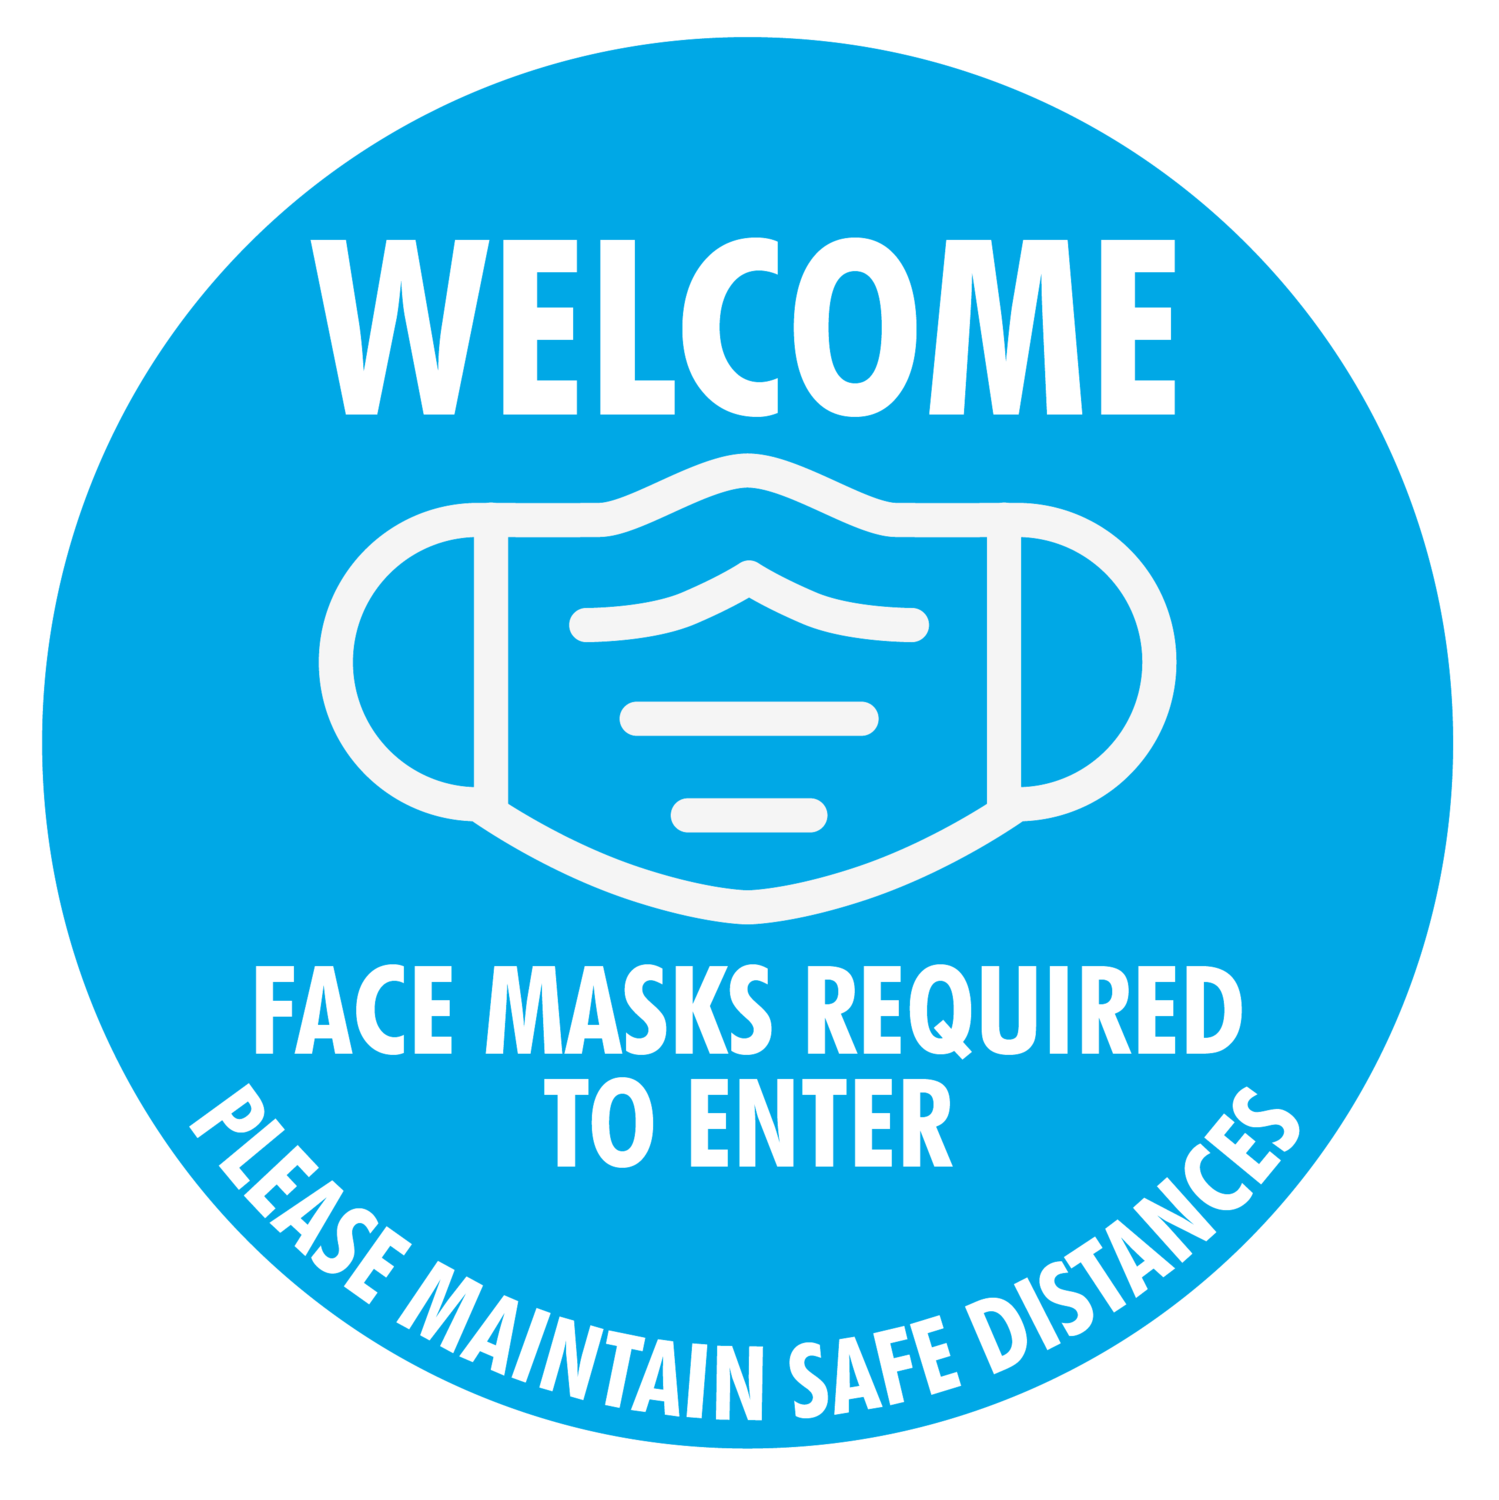 Mask Required - Social Distance Window Cling (Pack of 6)